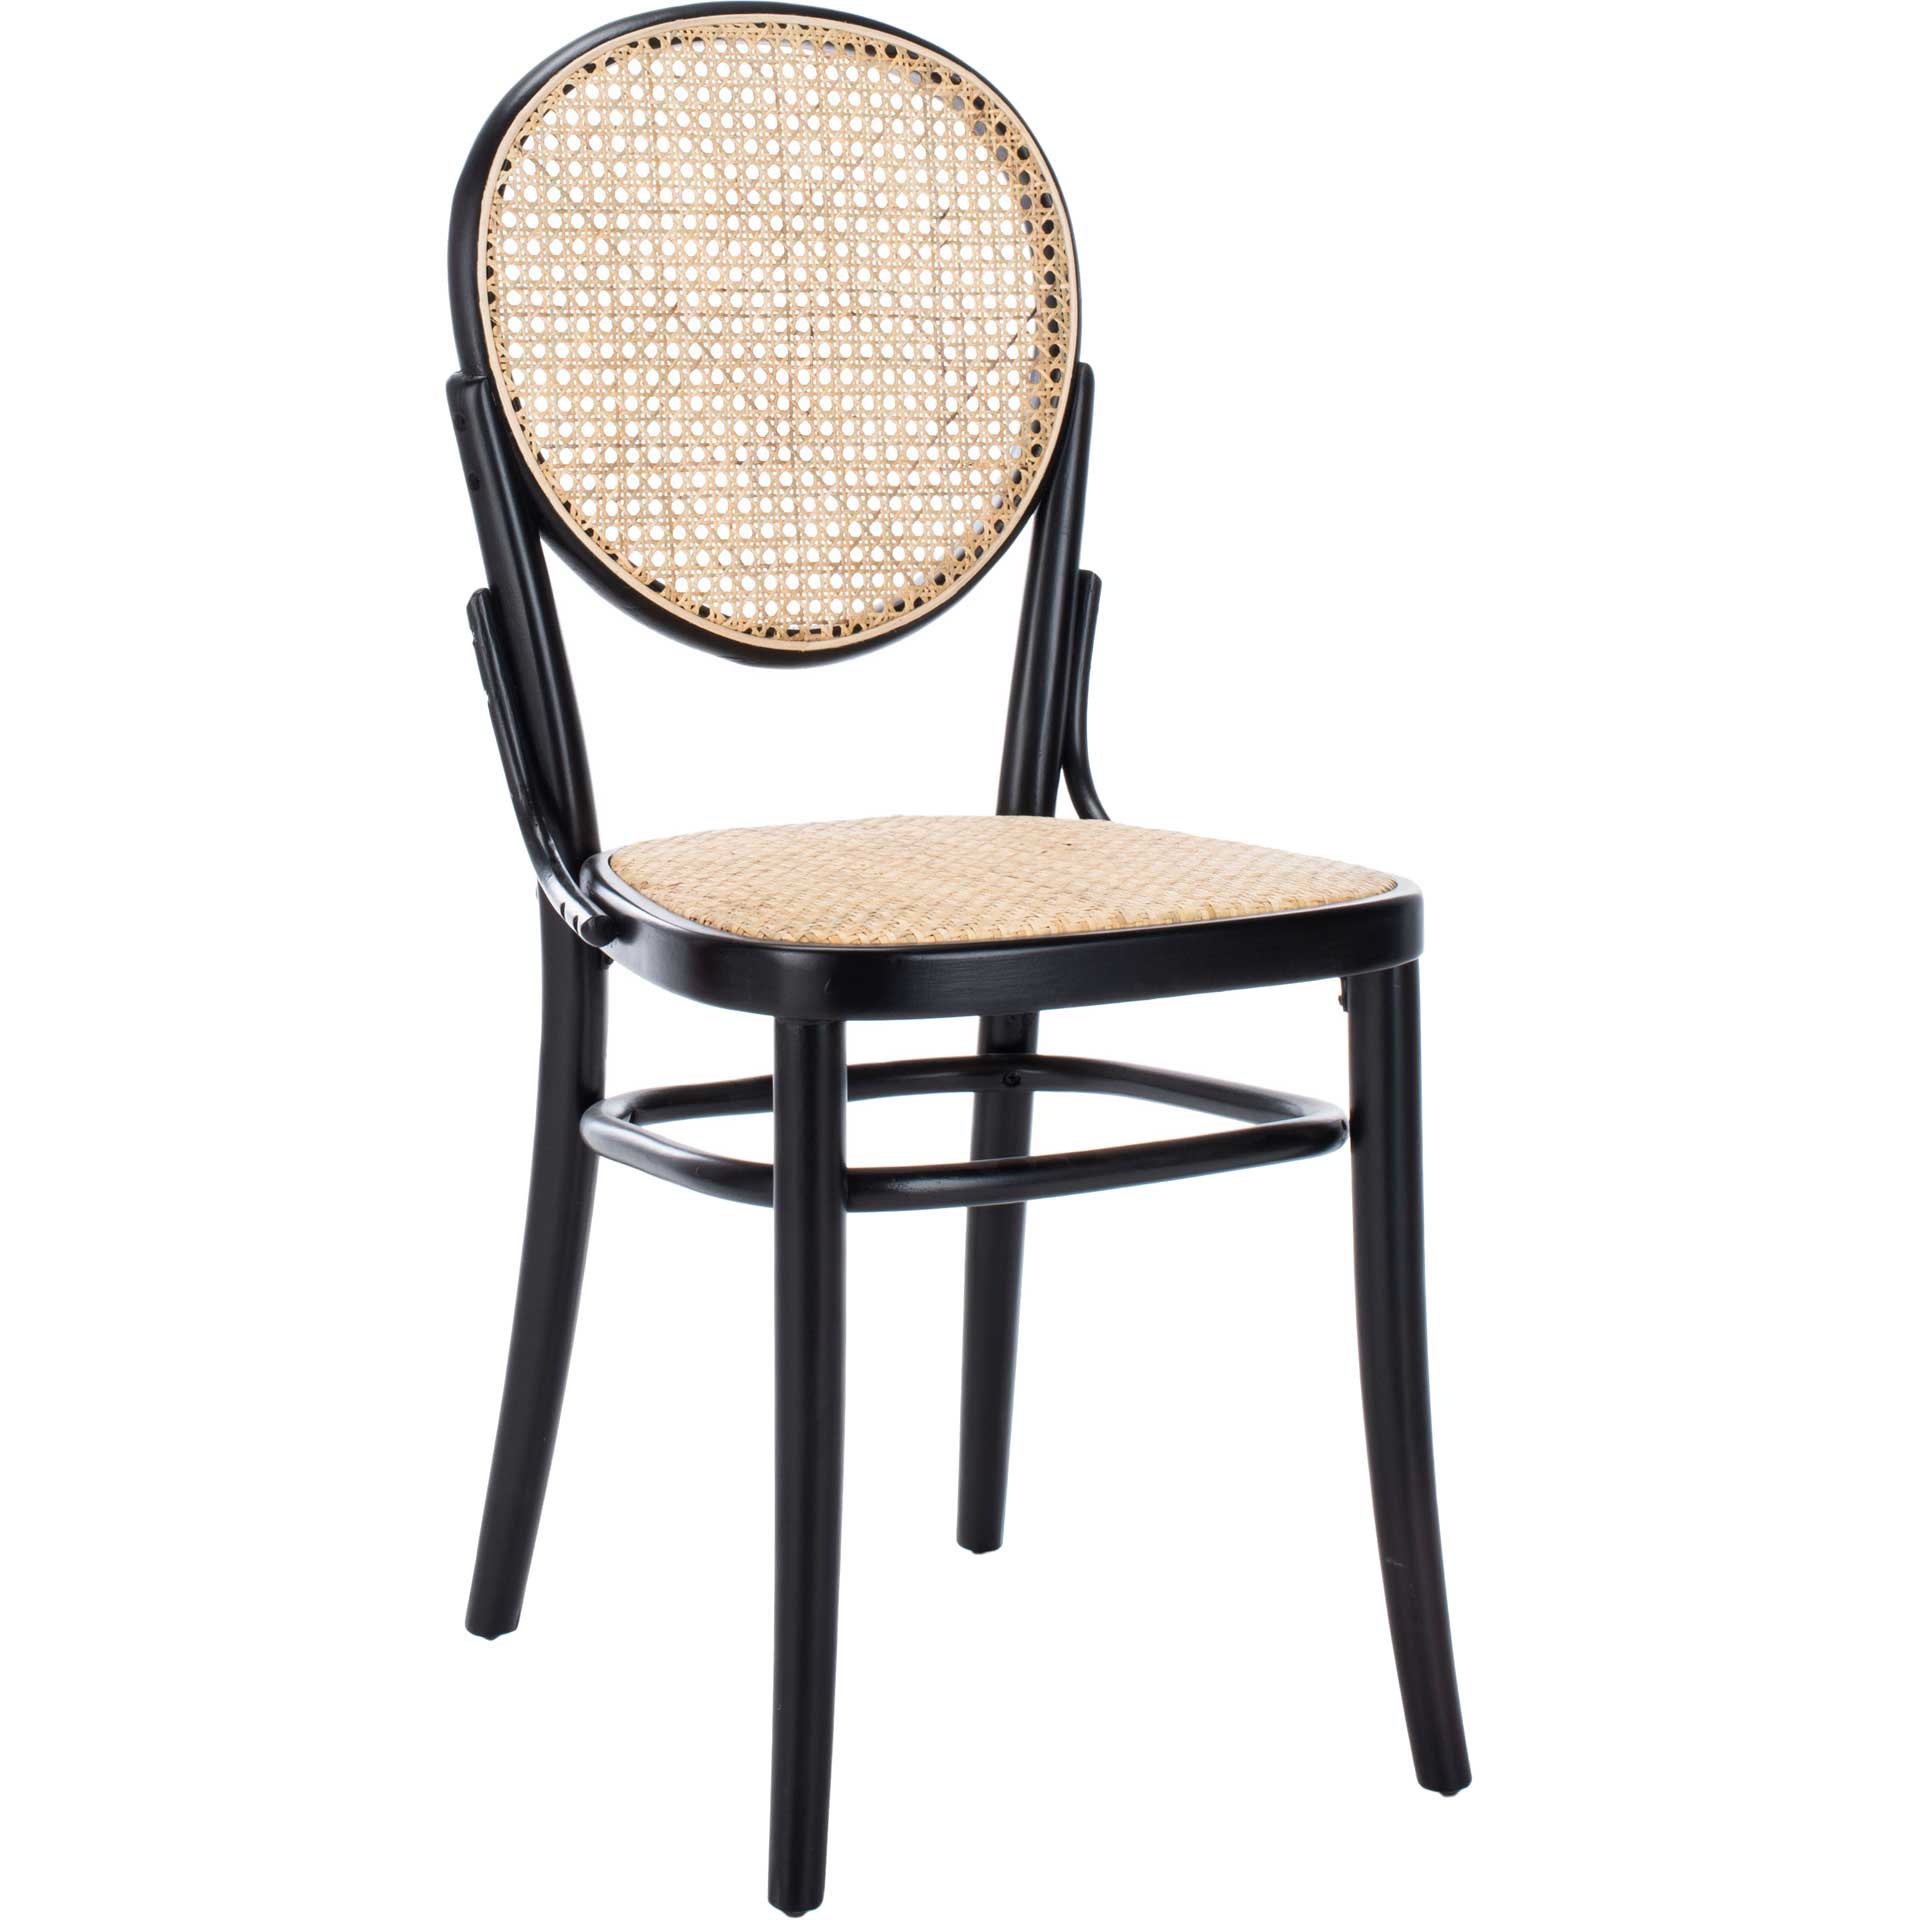 Sonia Cane Dining Chair Black/Natural (Set of 2)